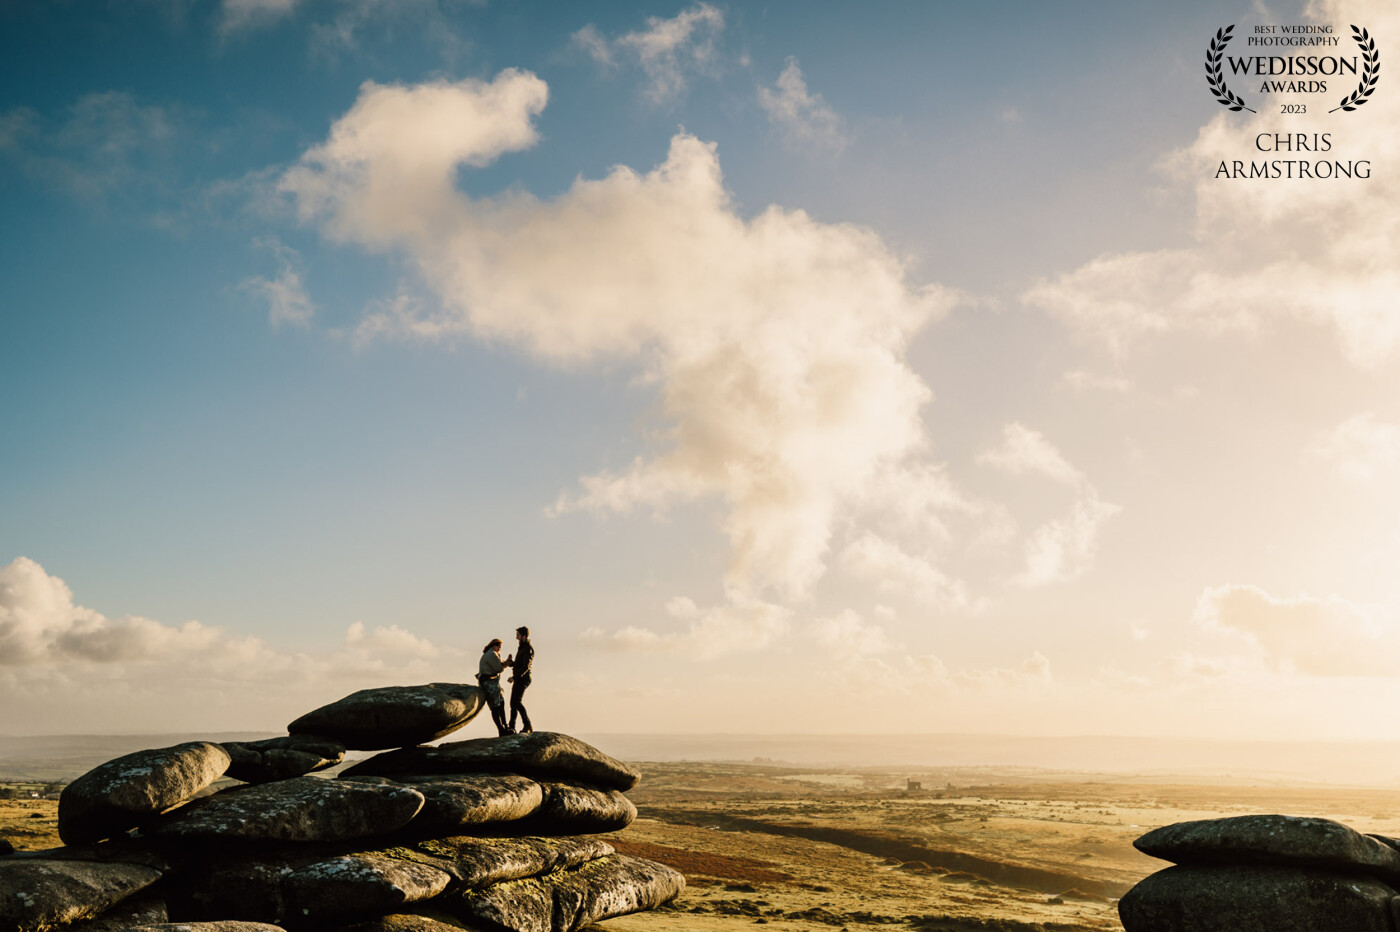 A beautiful autumnal sunset on the wild Bodmin moor for Flynn and Abbi's engagement shoot!